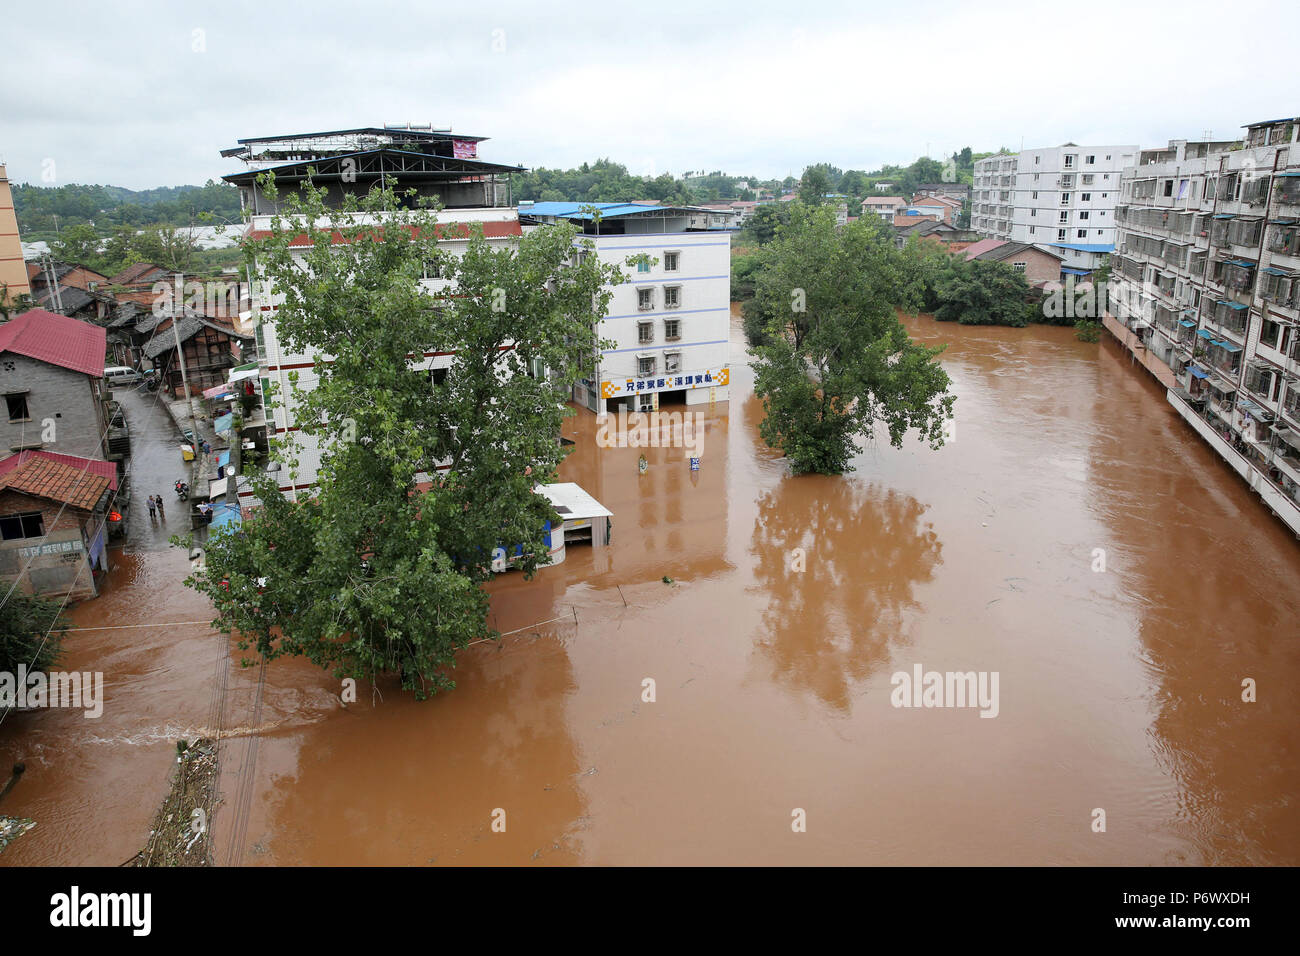 Neijiang. 3rd July, 2018. Photo taken on July 3, 2018 shows residential buildings in flood water in Tianjia Township of Neijiang, southwest China's Sichuan Province. Provincial flood control headquarters said a total of 115,900 people in Sichuan were affected by heavy rains. Crops, roads, bridges and school buildings were damaged. Credit: Lan Zitao/Xinhua/Alamy Live News Stock Photo